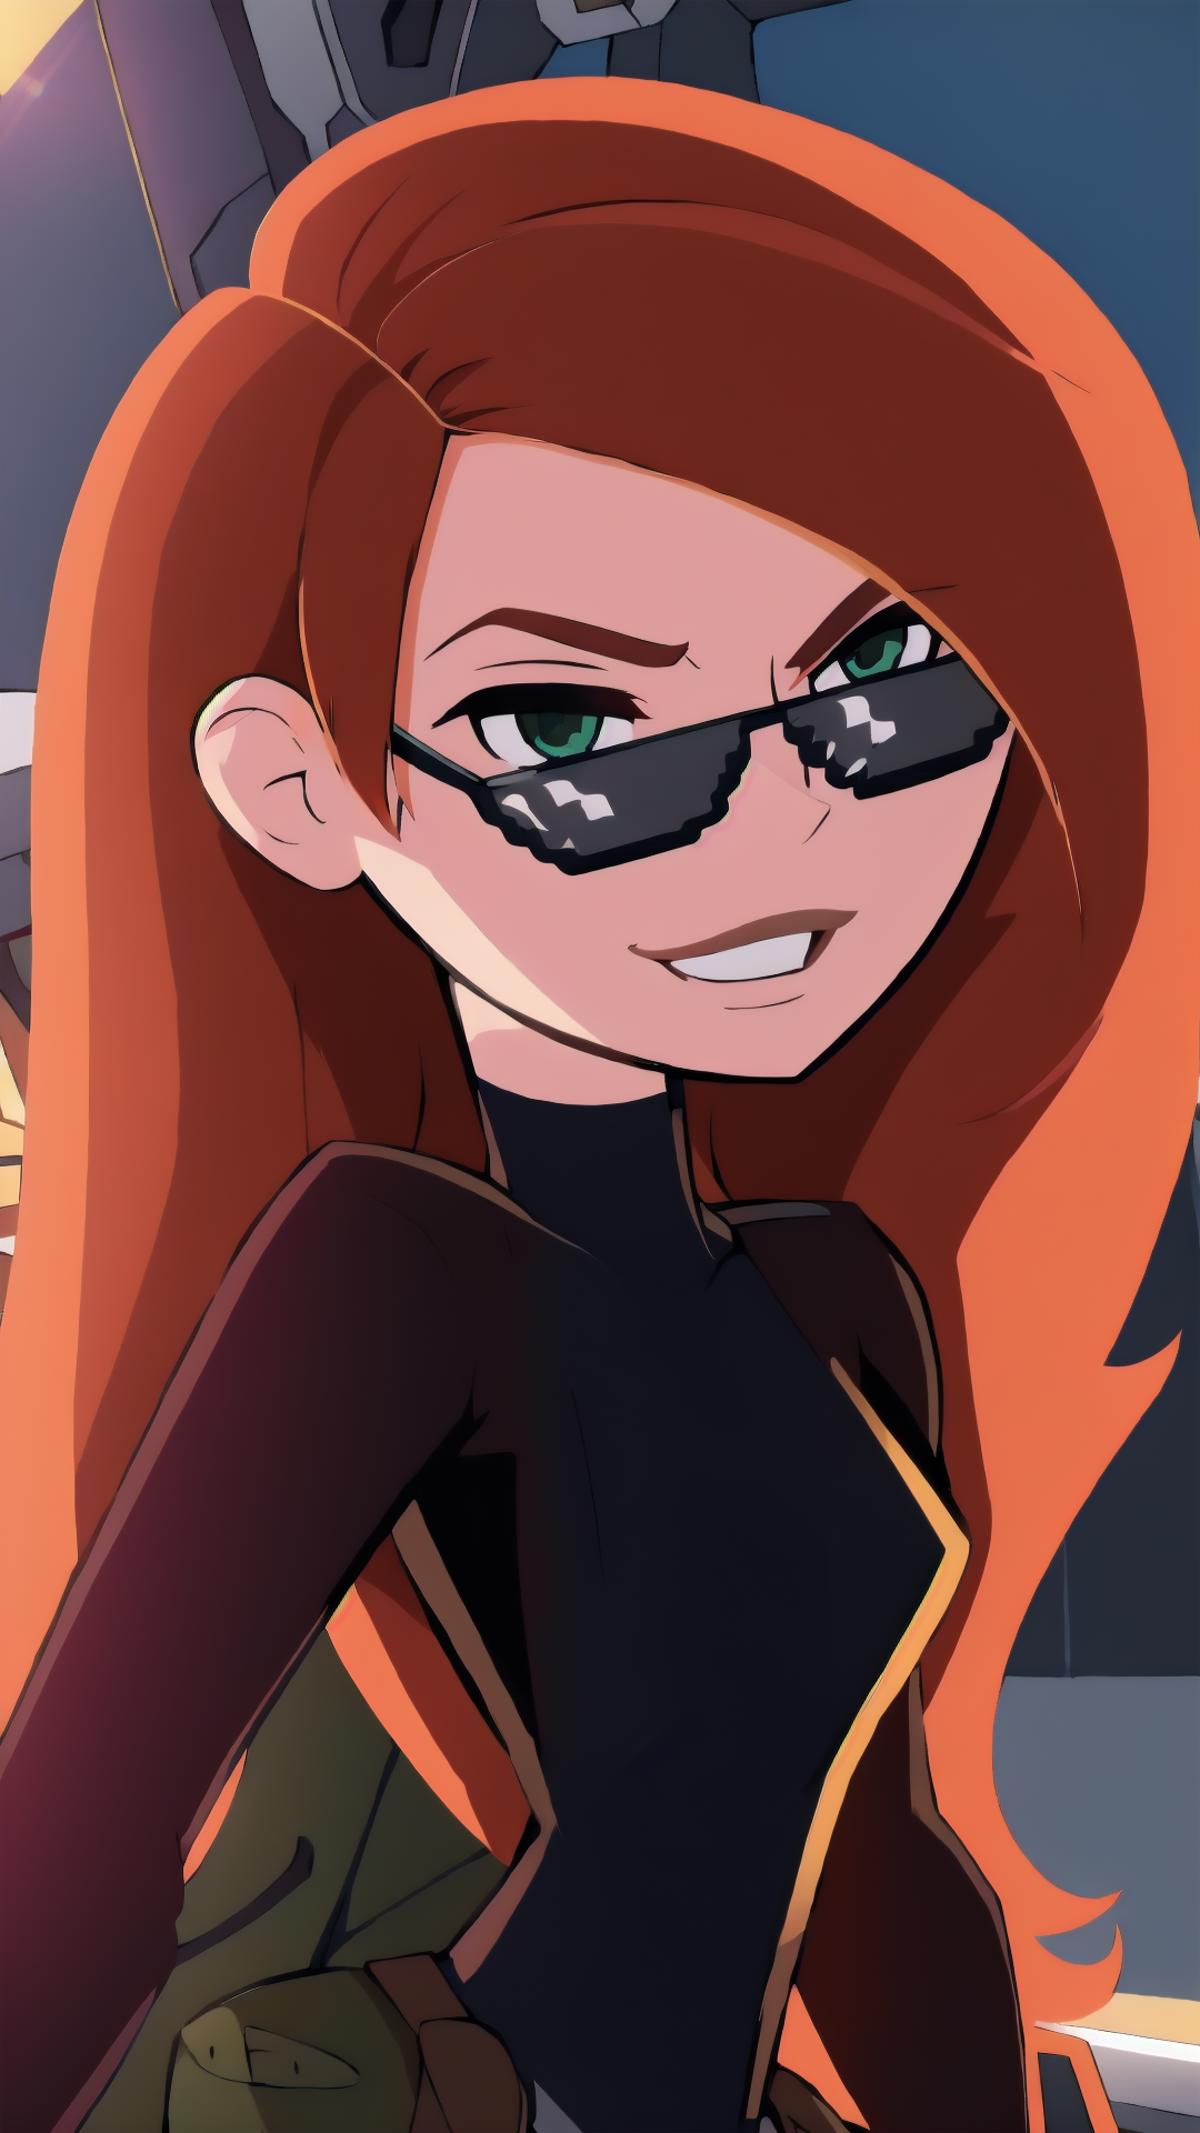 A cartoon drawing of a woman with orange hair, wearing sunglasses and a black shirt.